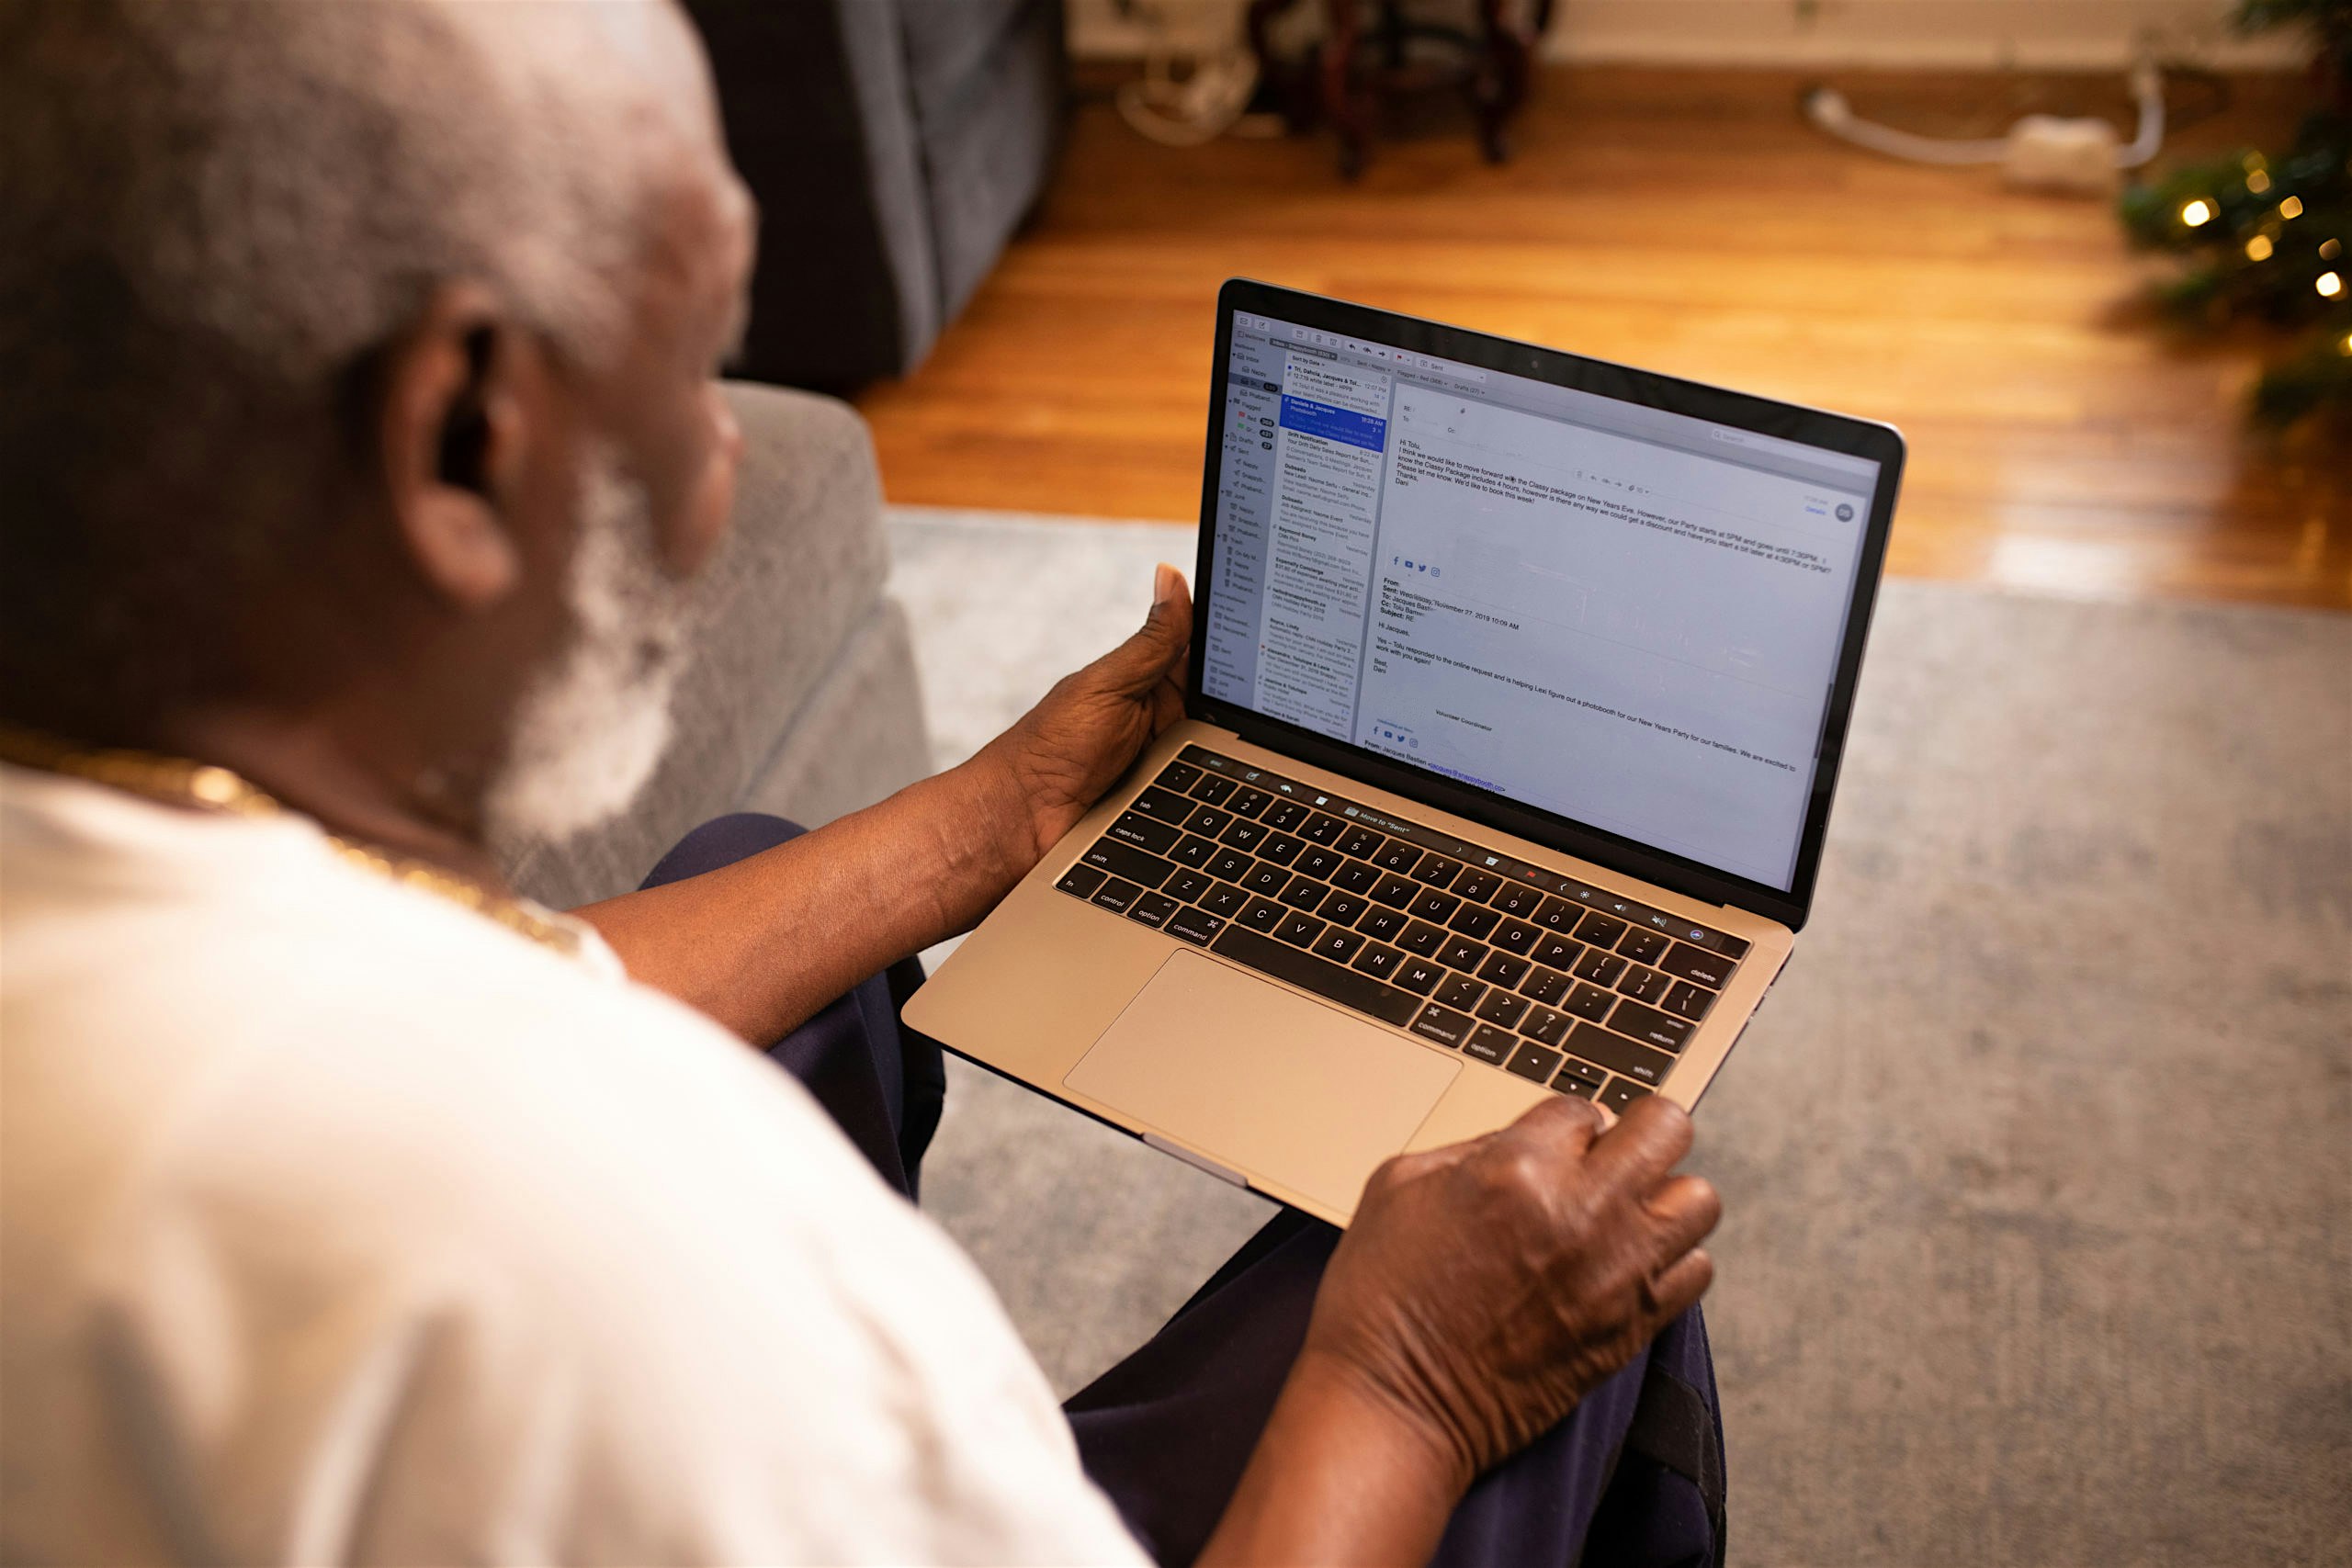 image of an older Black person with grey hair and beard viewing a laptop